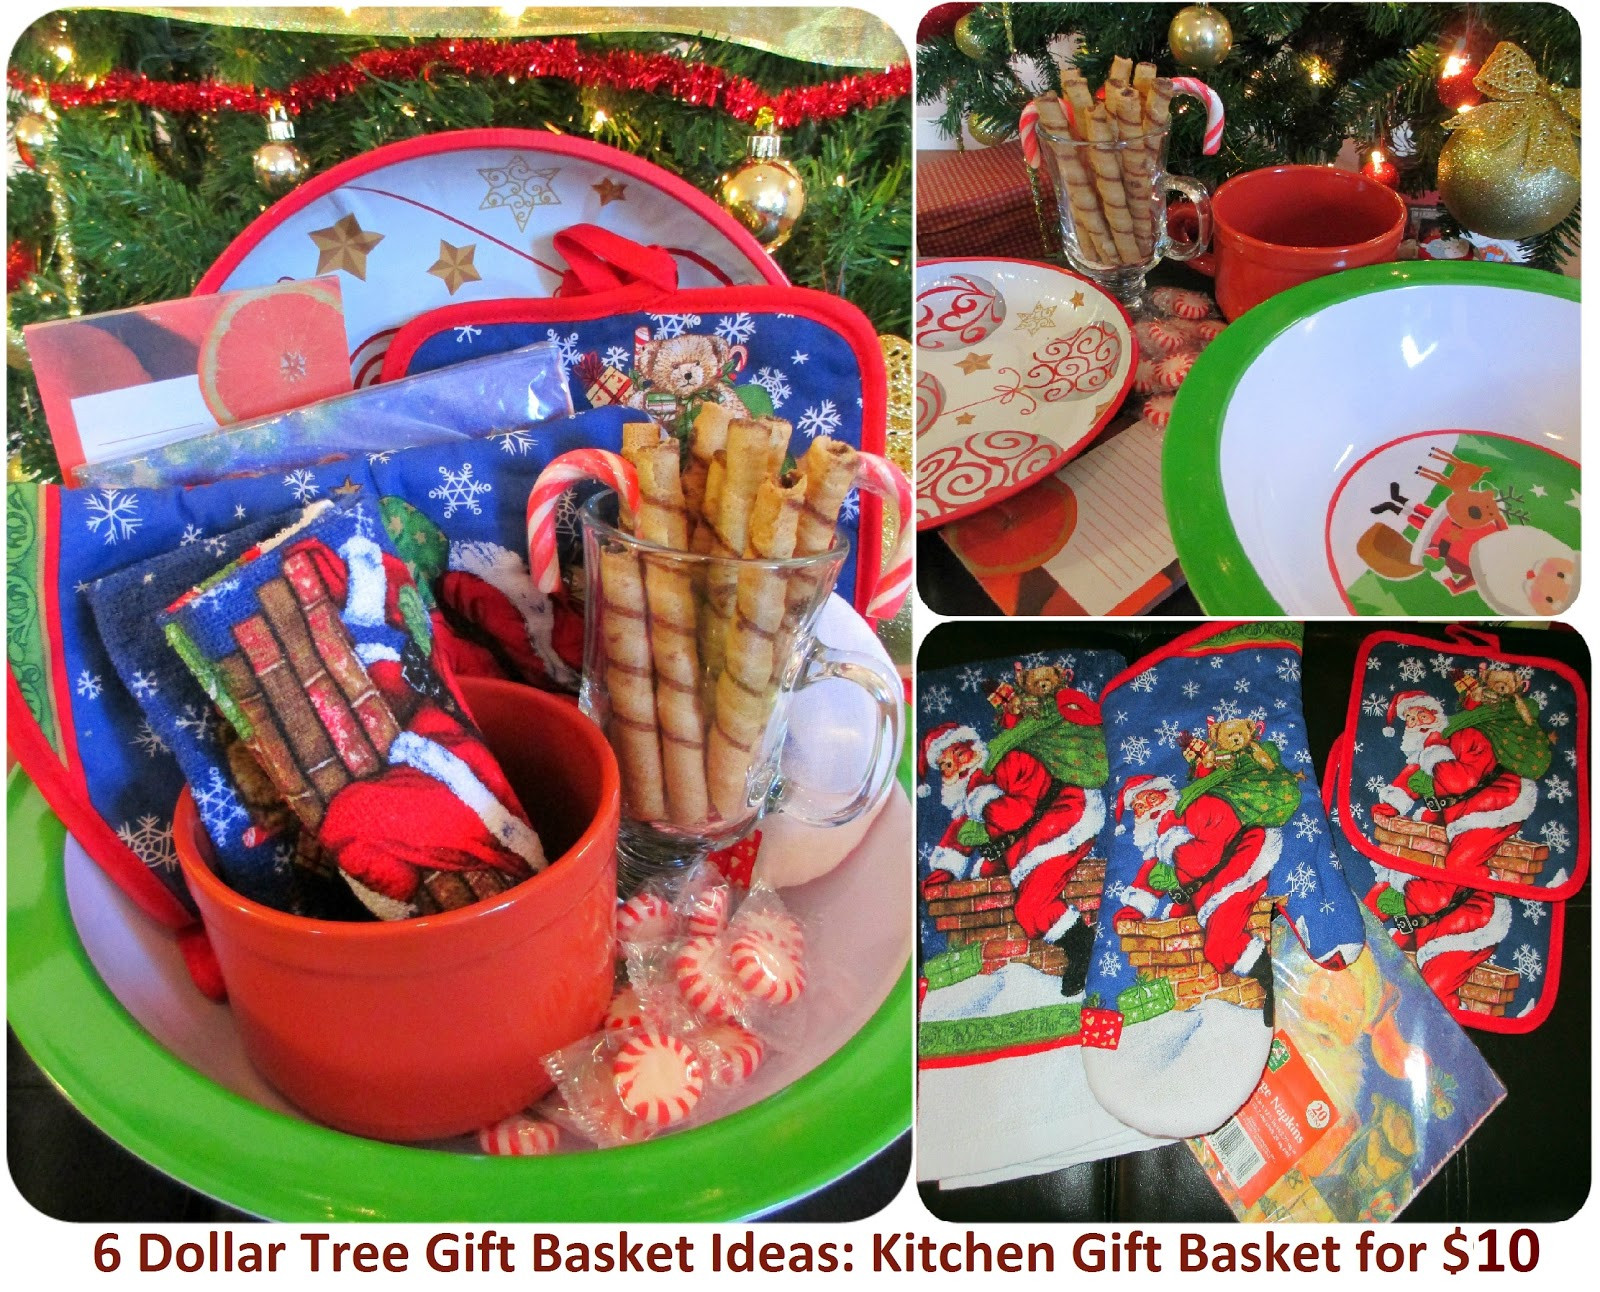 Cheap Holiday Gift Basket Ideas
 Maria Sself Chekmarev Dollar Store Last Minute Christmas